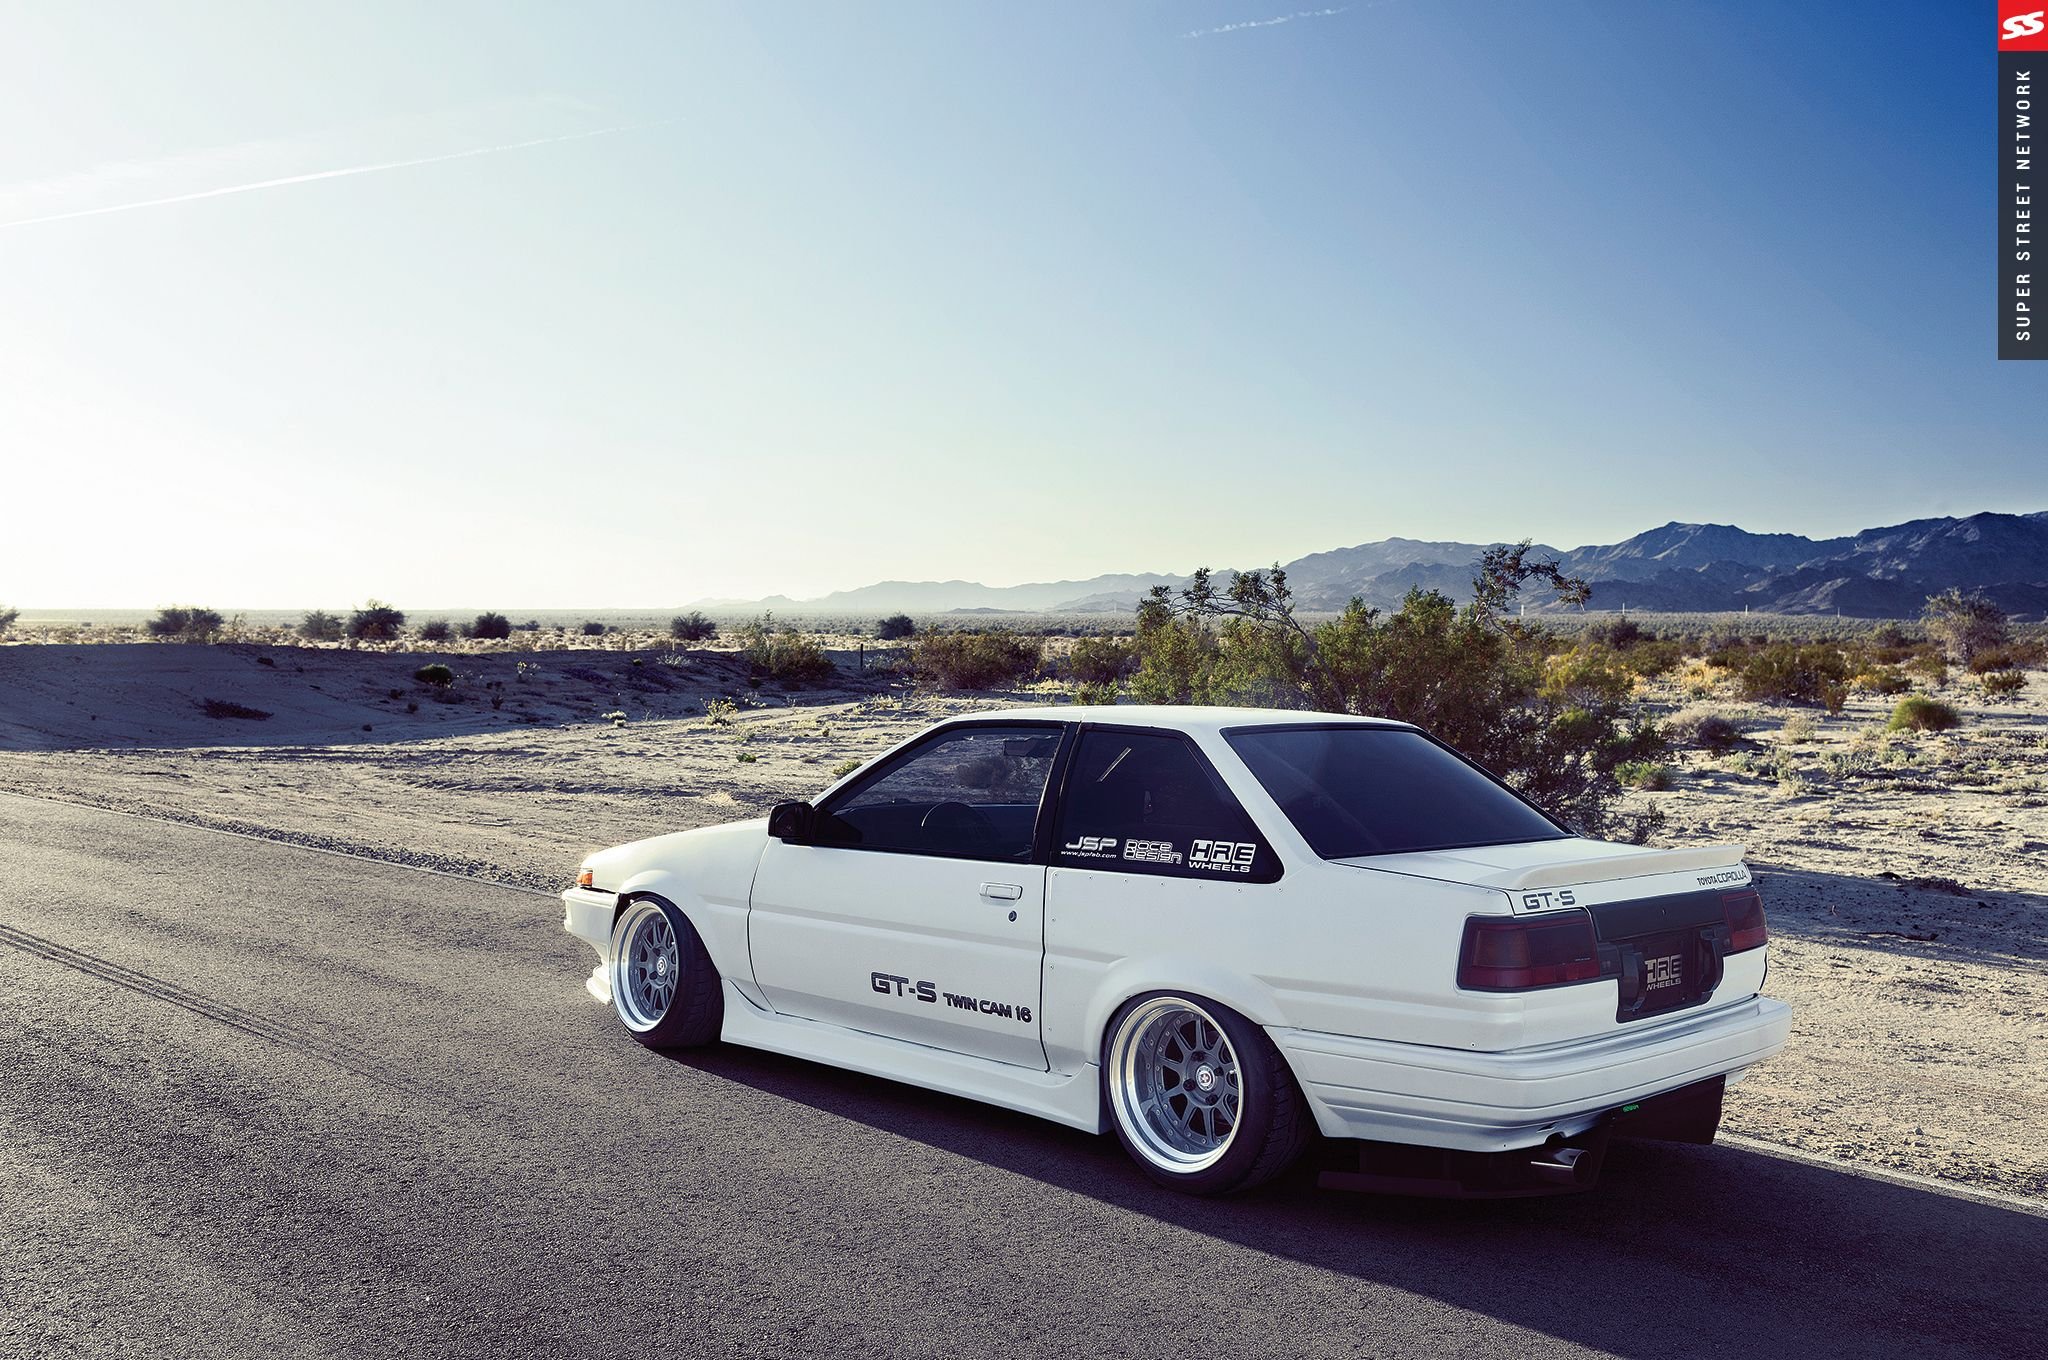 ae86, Toyota, Corollas, Cars, Modified Wallpapers HD / Desktop and